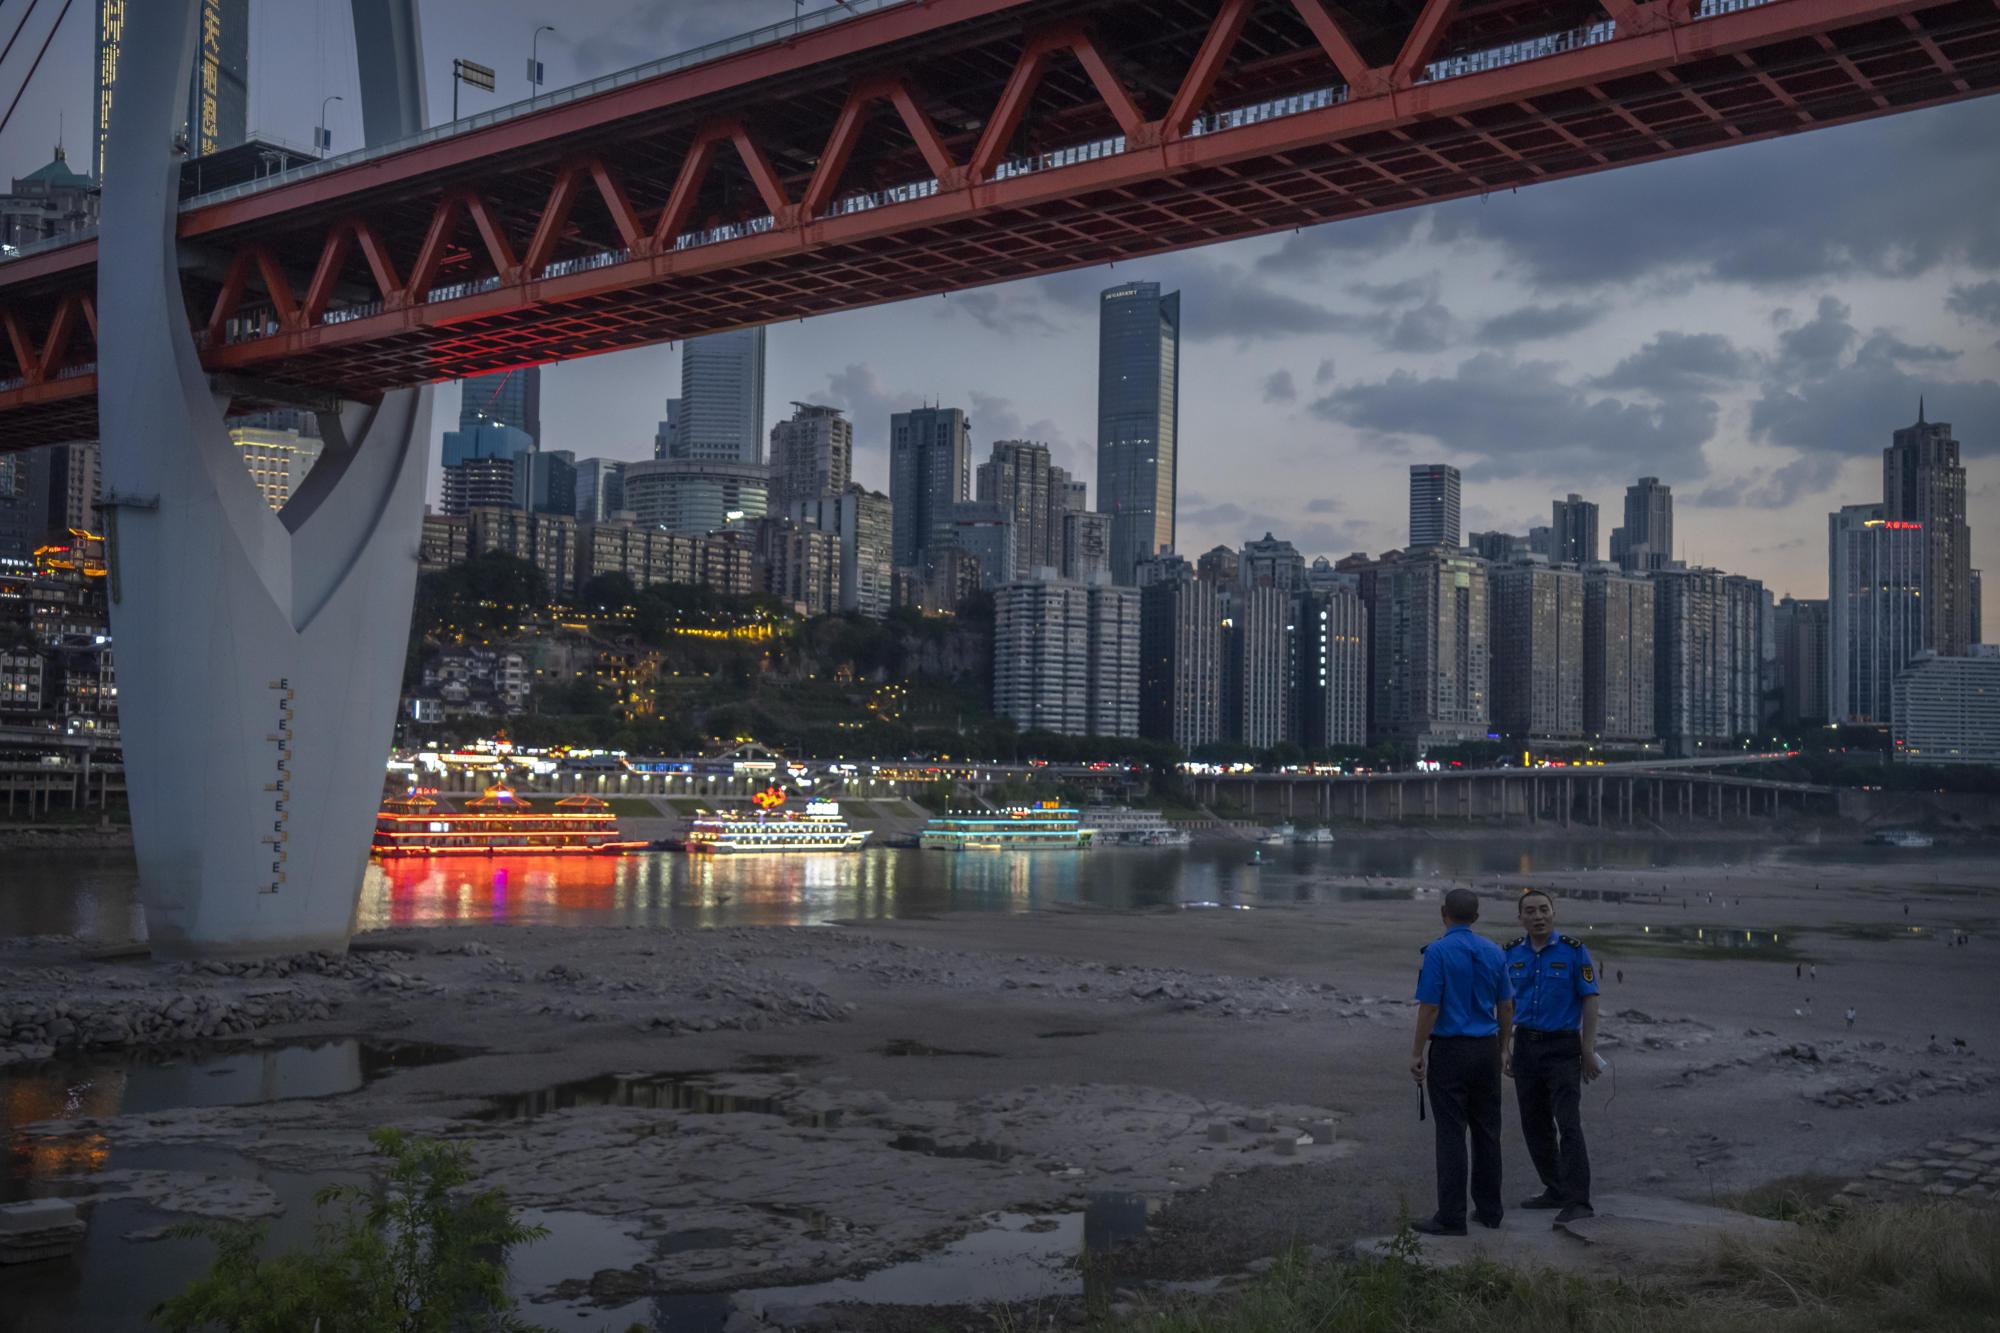 Security officers stand on a hillside after clearing away visitors from the dry riverbed of the Jialing River, a tributary of the Yangtze, in southwestern China's Chongqing Municipality, Saturday, Aug. 20, 2022. The very landscape of Chongqing, a megacity that also takes in surrounding farmland and steep and picturesque mountains, has been transformed by an unusually long and intense heat wave and an accompanying drought. (AP Photo/Mark Schiefelbein)